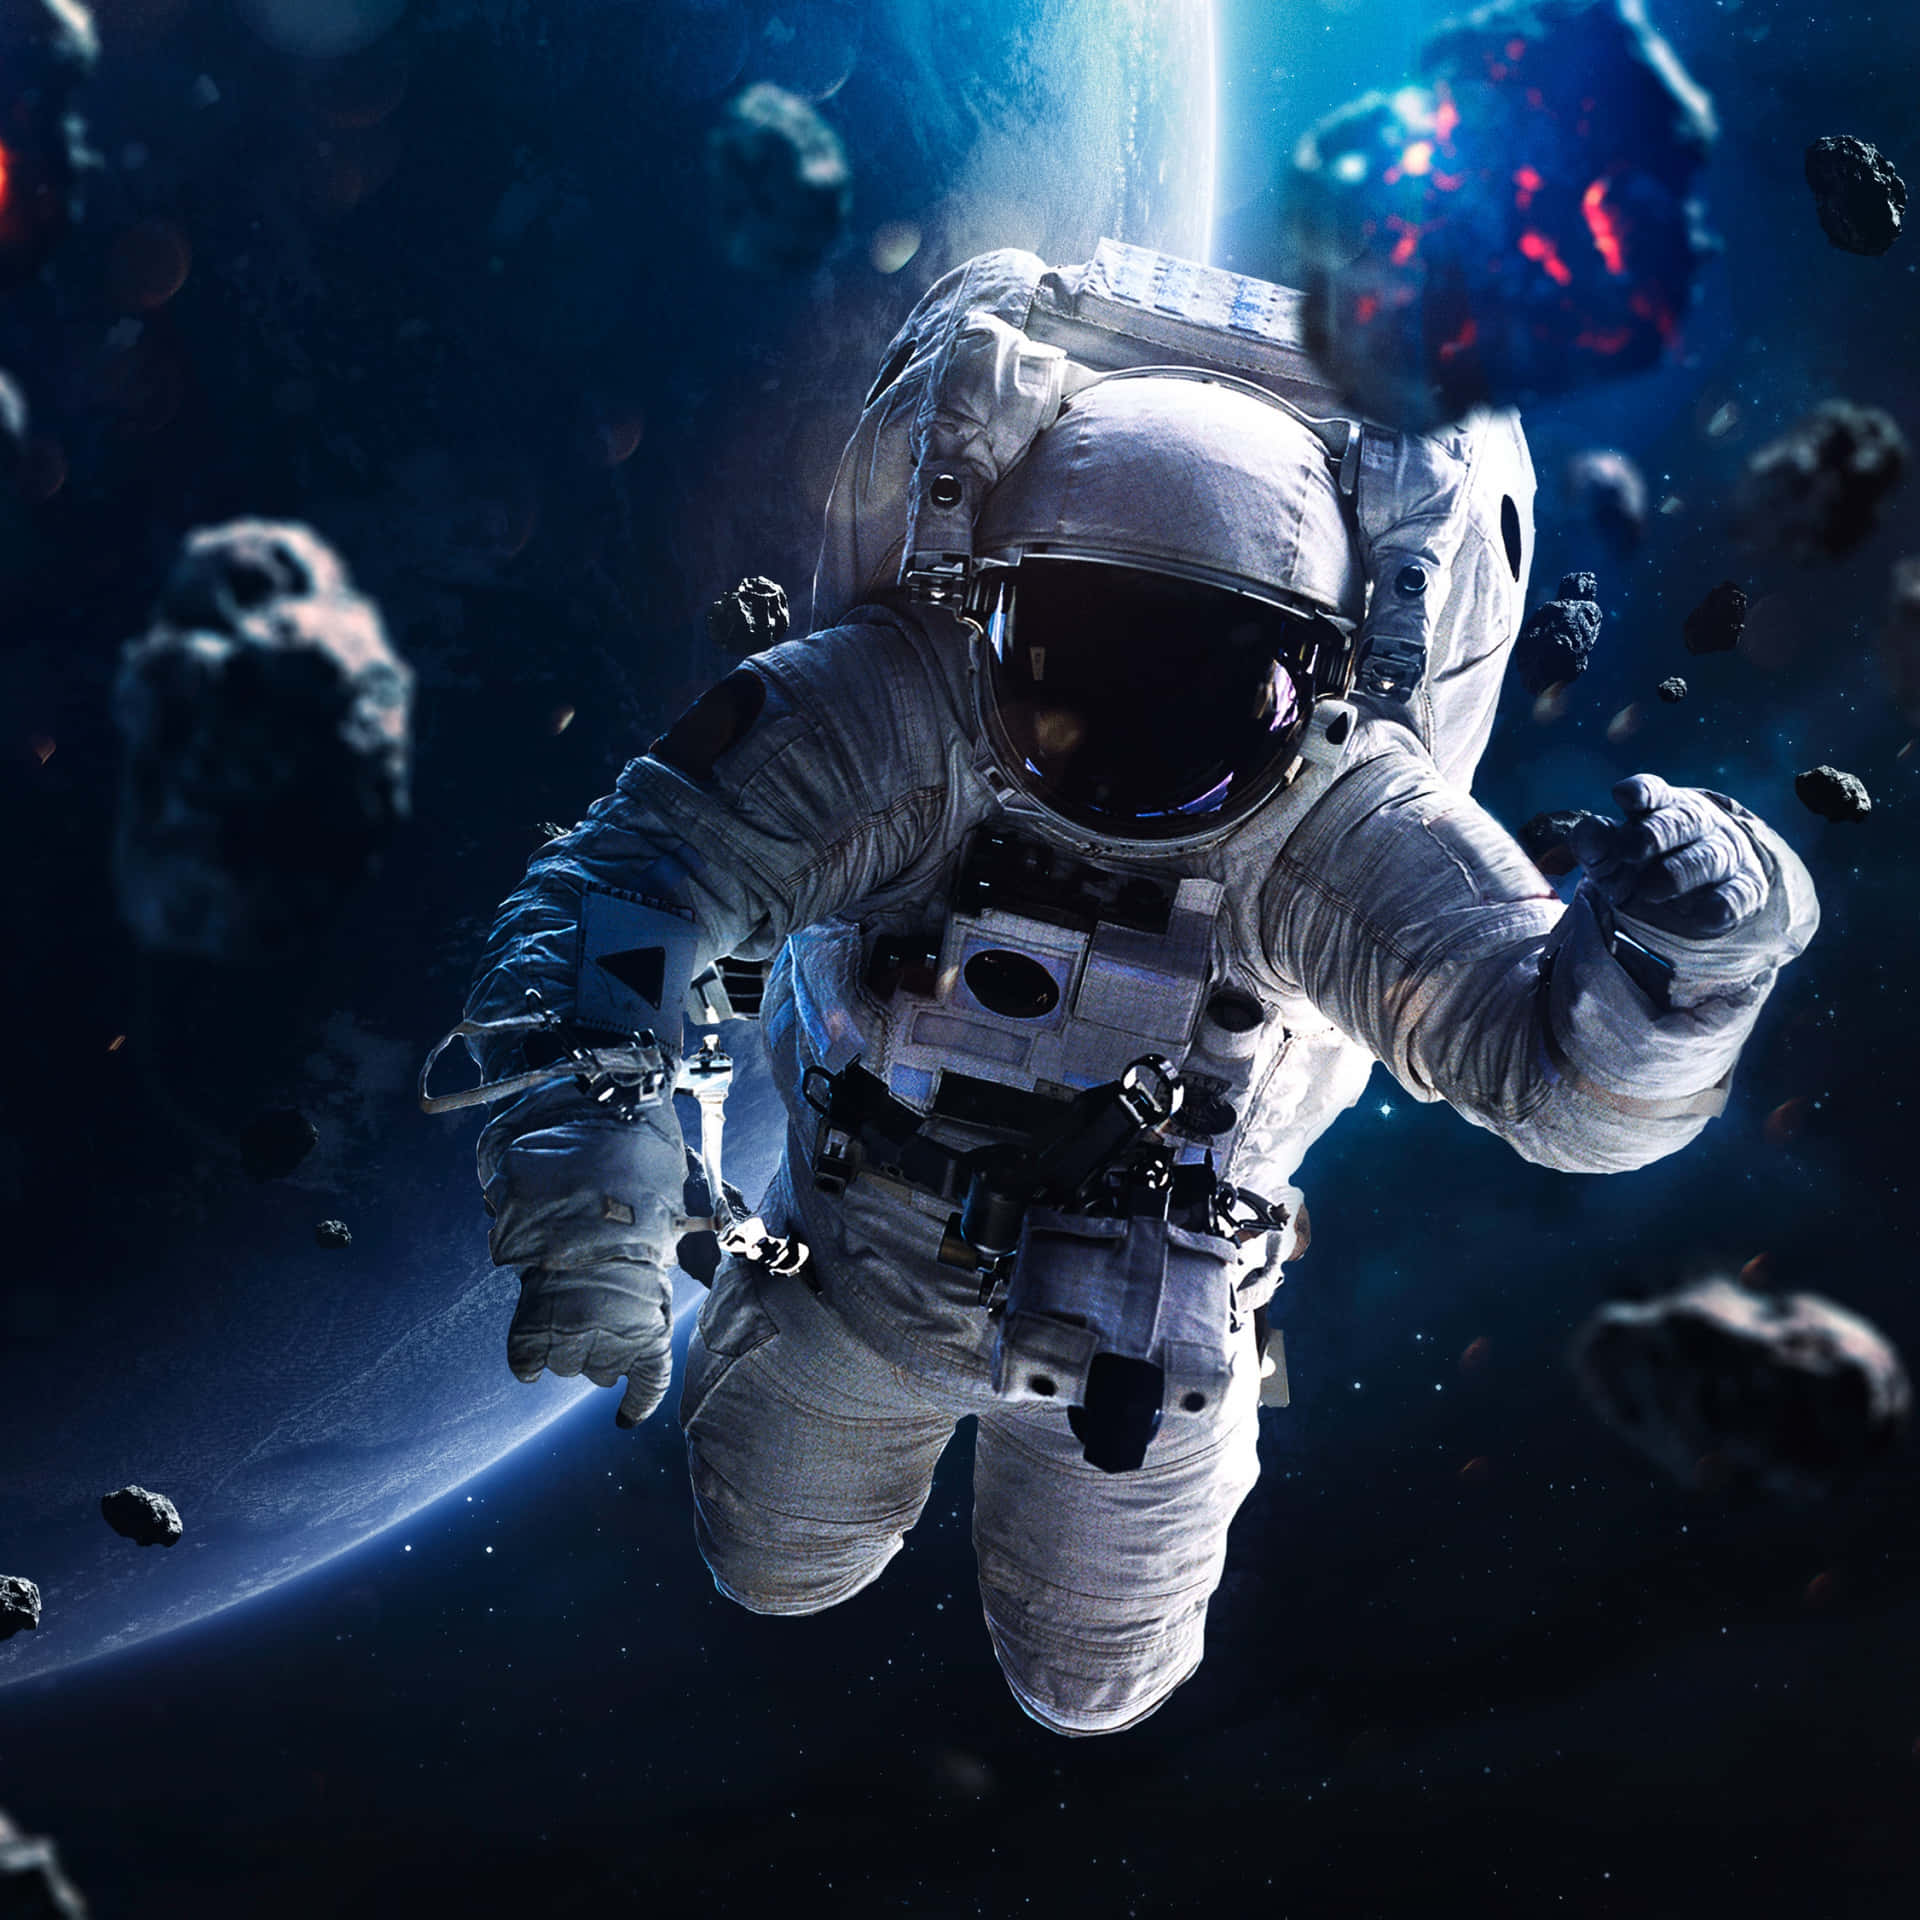 An Amazing Astronaut Floating in Outer Space Wallpaper